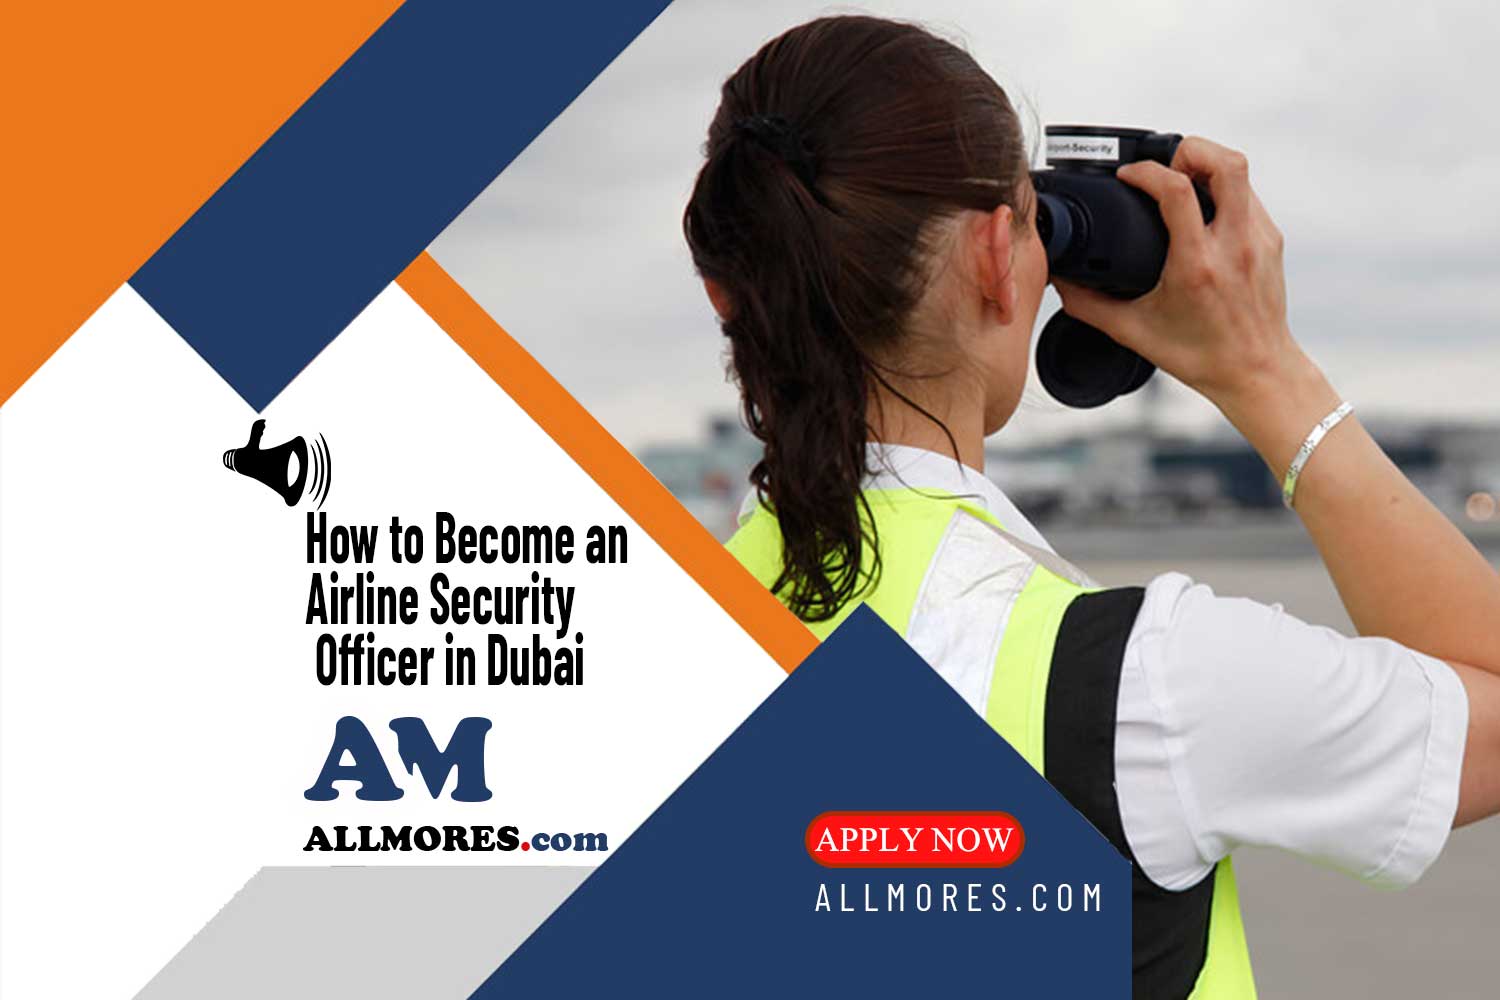 Airline Security Officer in Dubai – ALL MORES